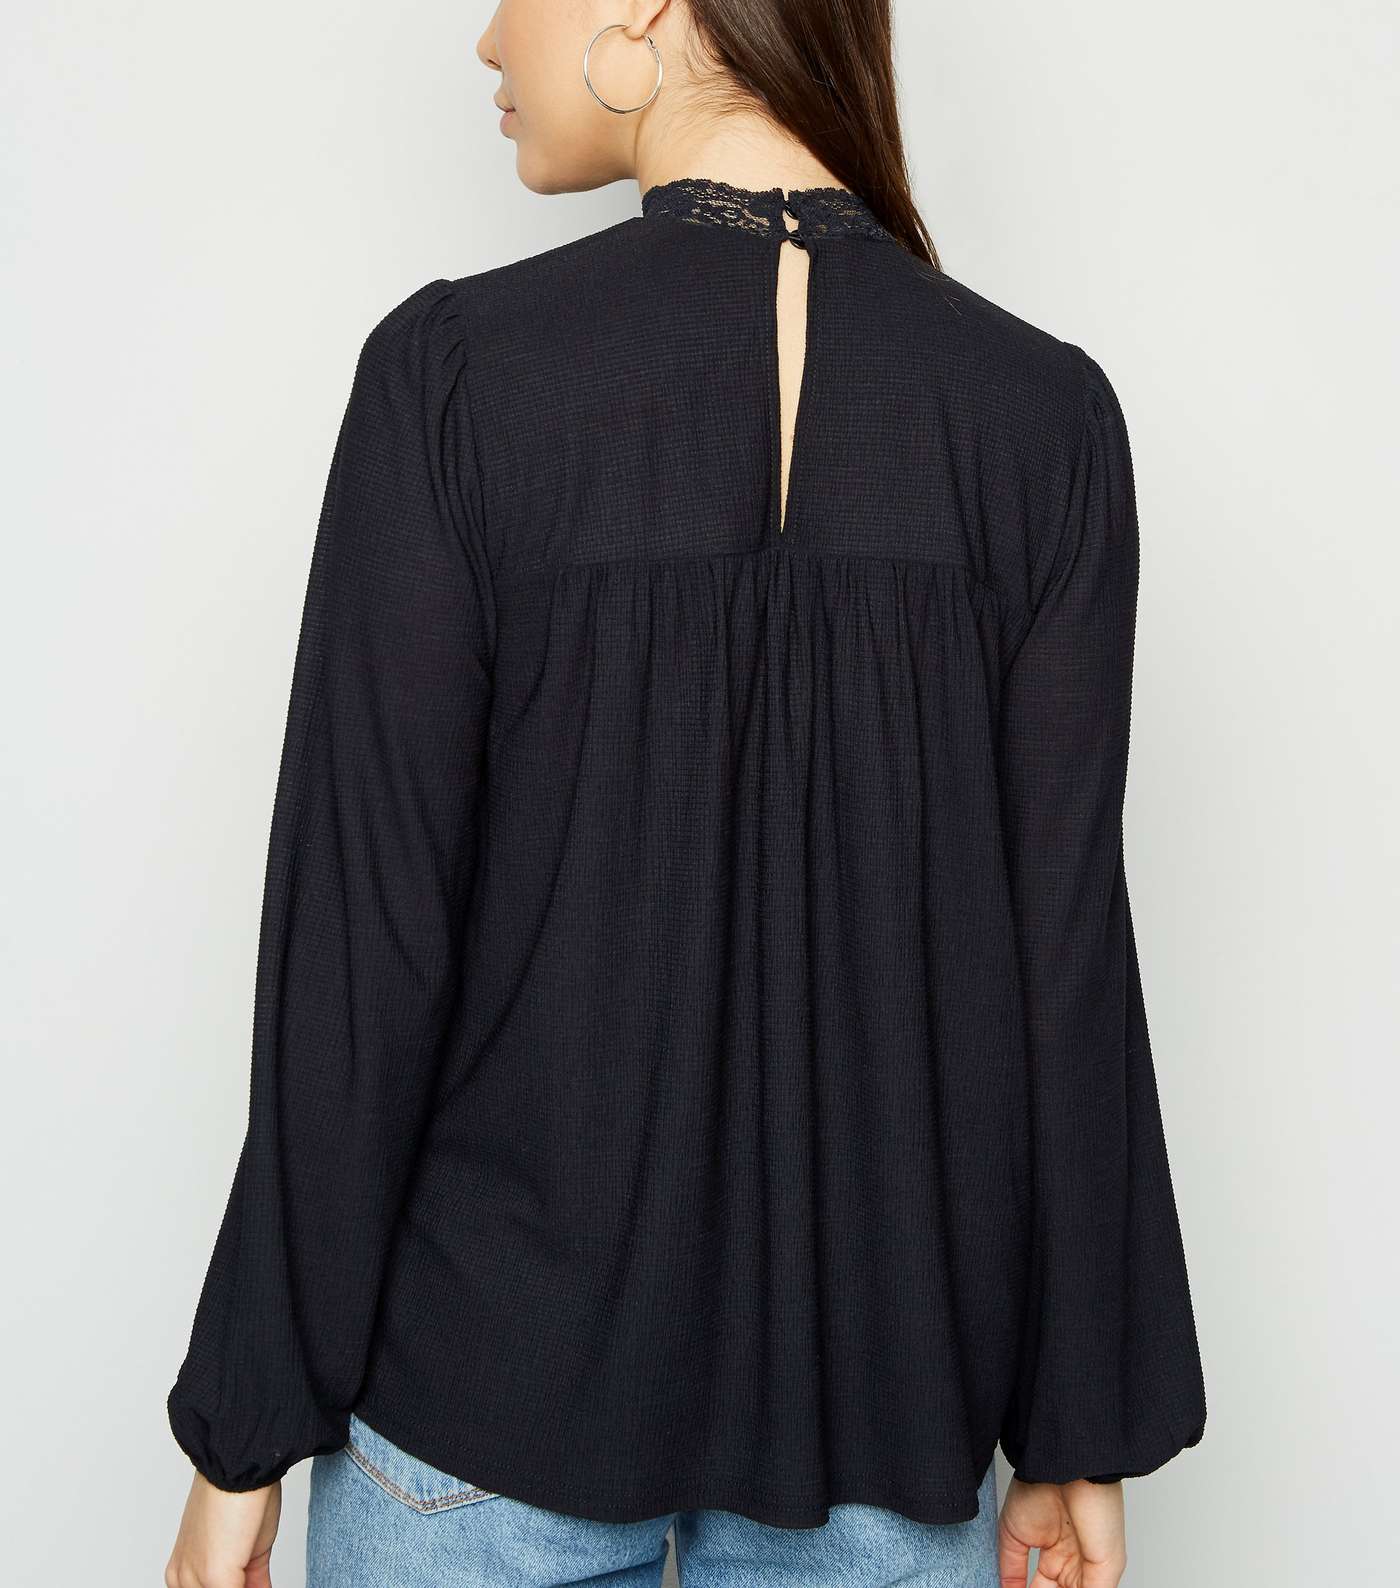 Black Textured Embroidered Yoke Top Image 3